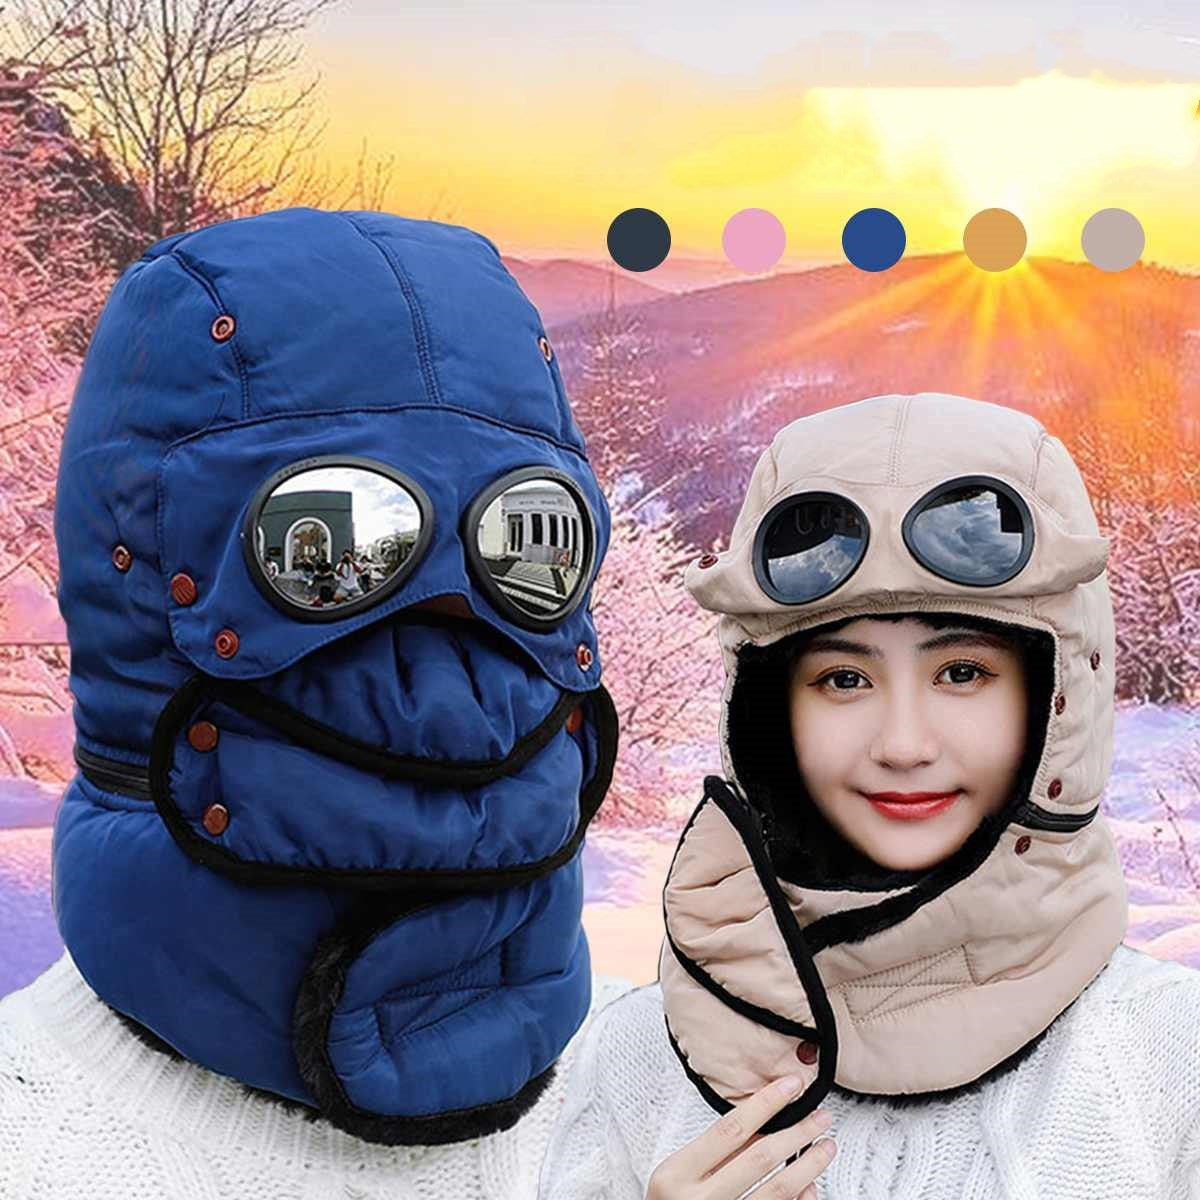  "Stay cozy on winter adventures with our Thermal Trapper Hat featuring built-in glasses. Shop now!" image 1